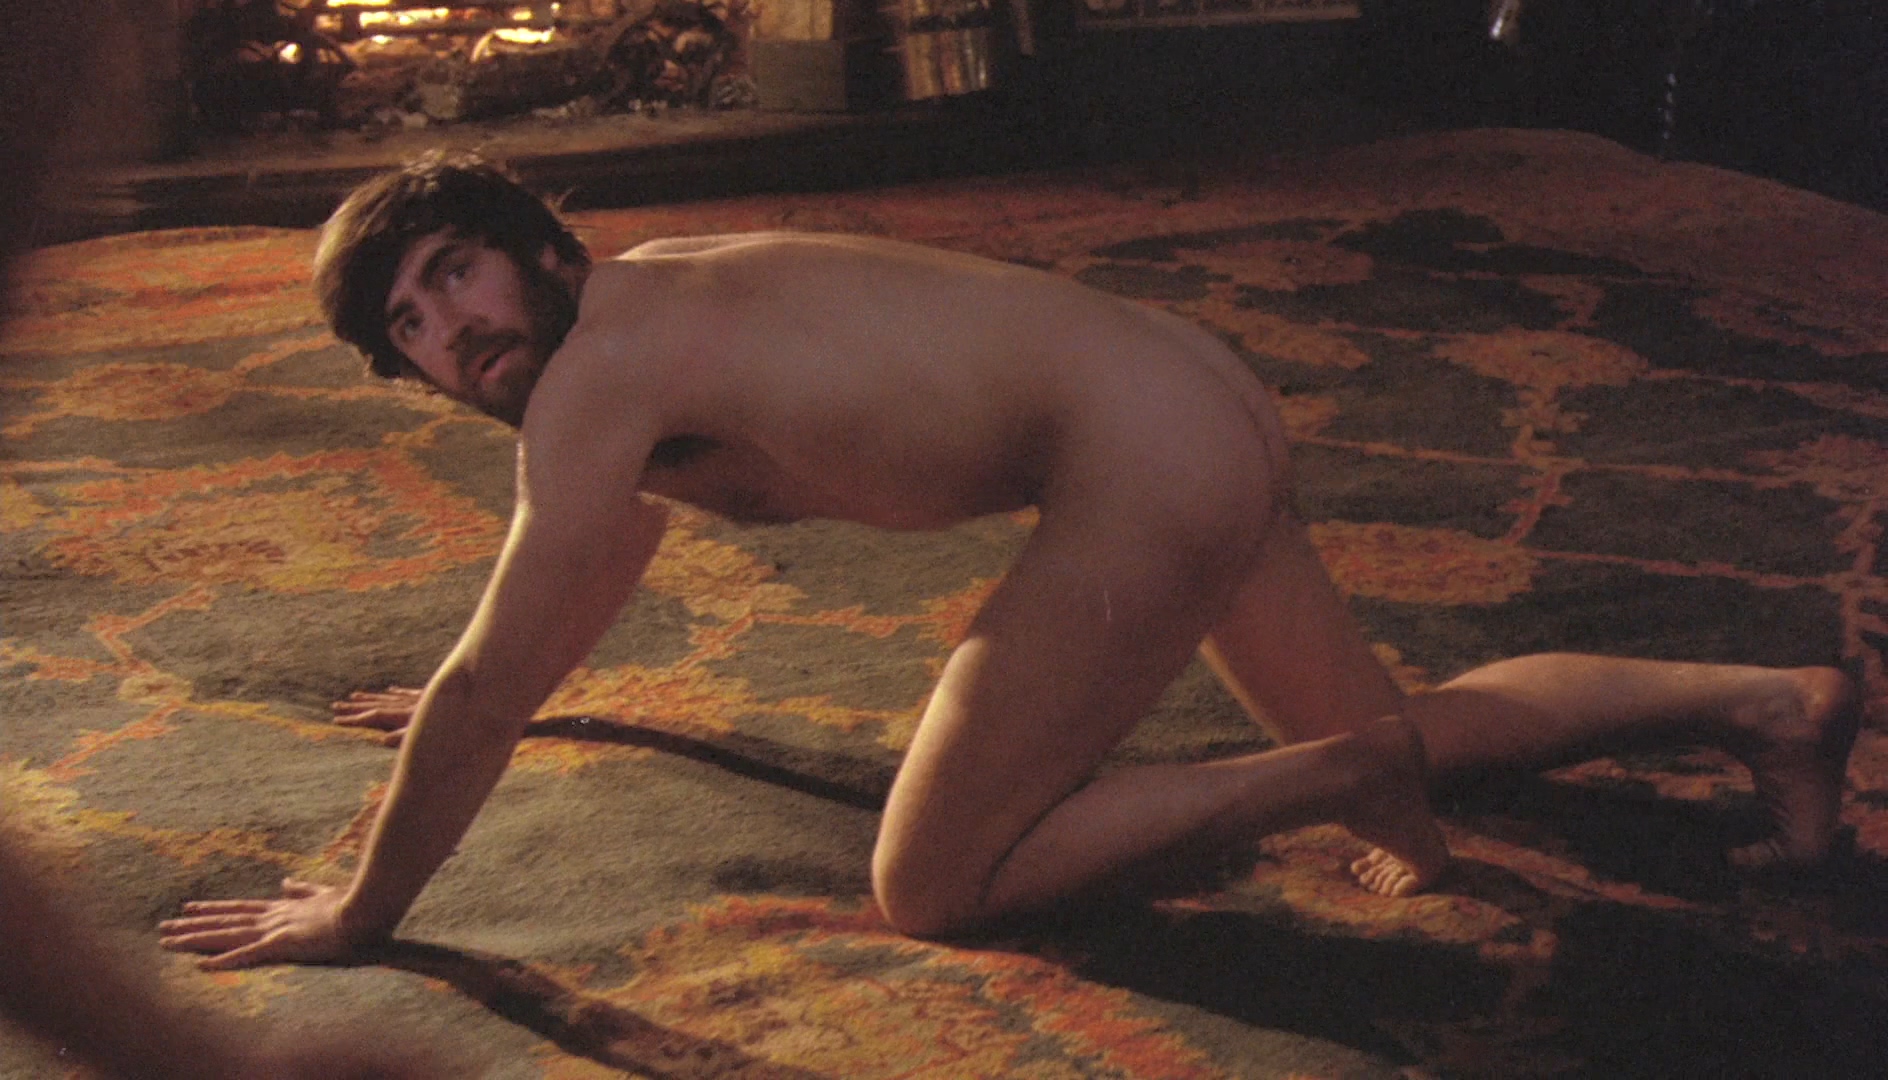 OMG, theyâ€™re naked RETRO EDITION: Alan Bates and Oliver Reed wrestle down i...